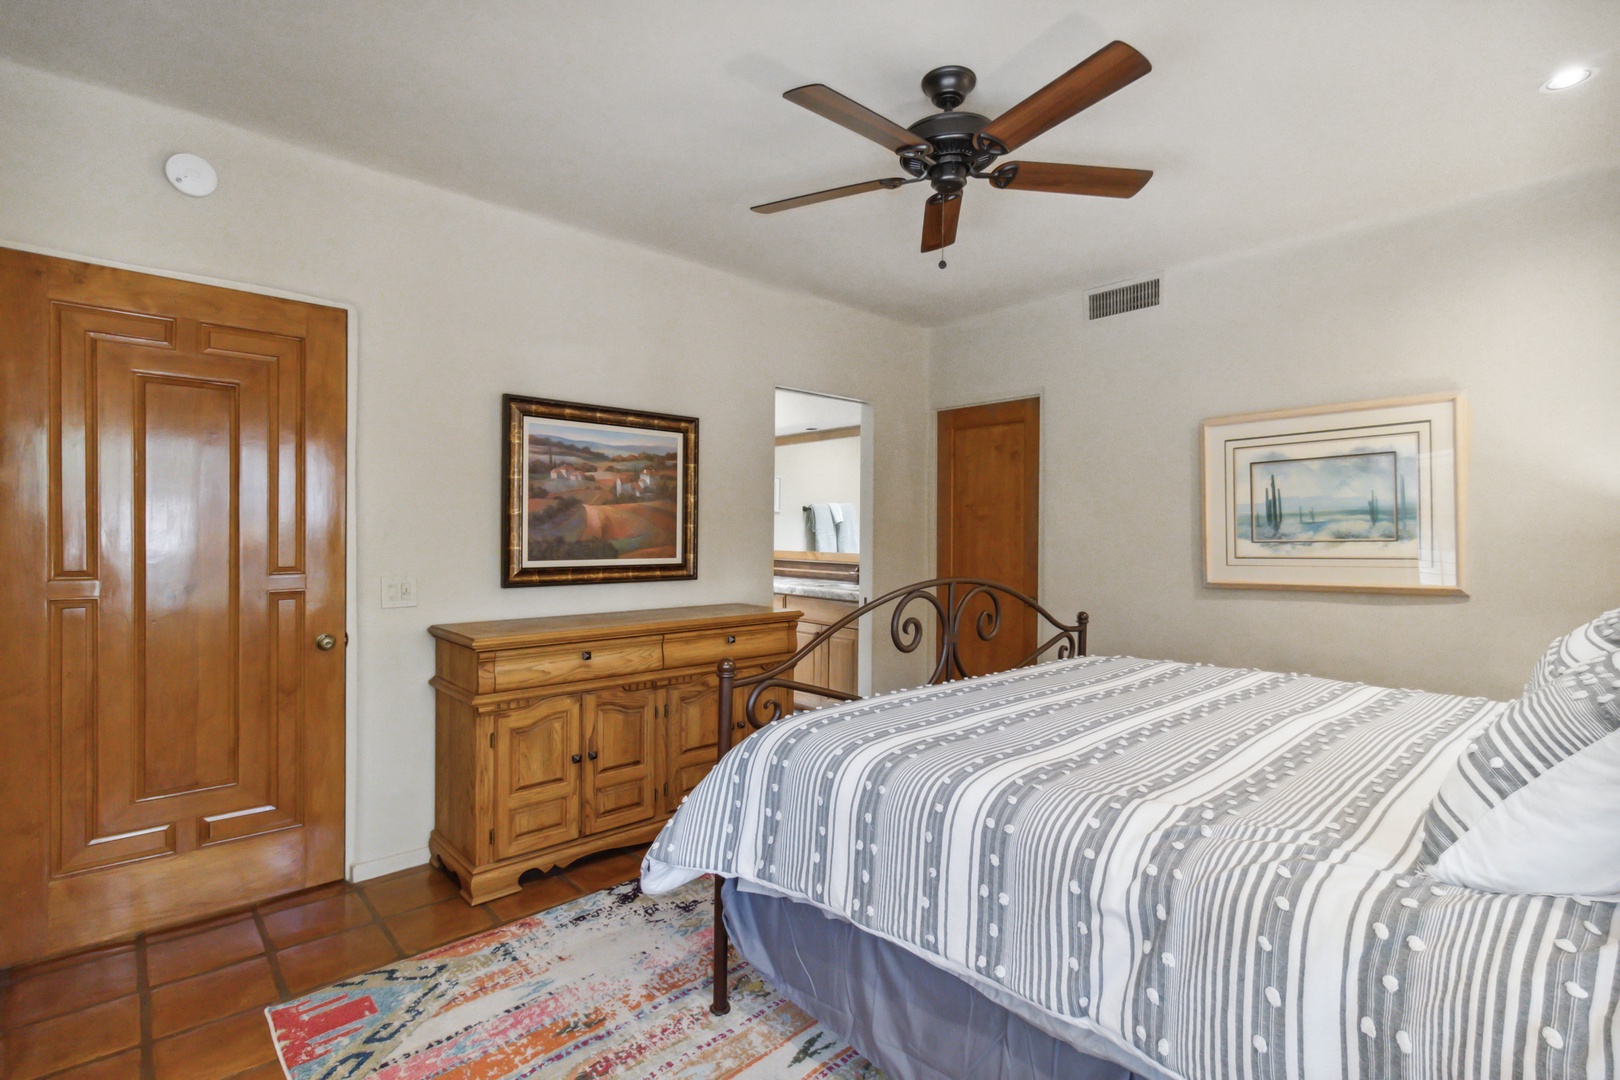 Scottsdale Vacation Rentals, Boulders Hideaway Villa - Tranquil space to rest